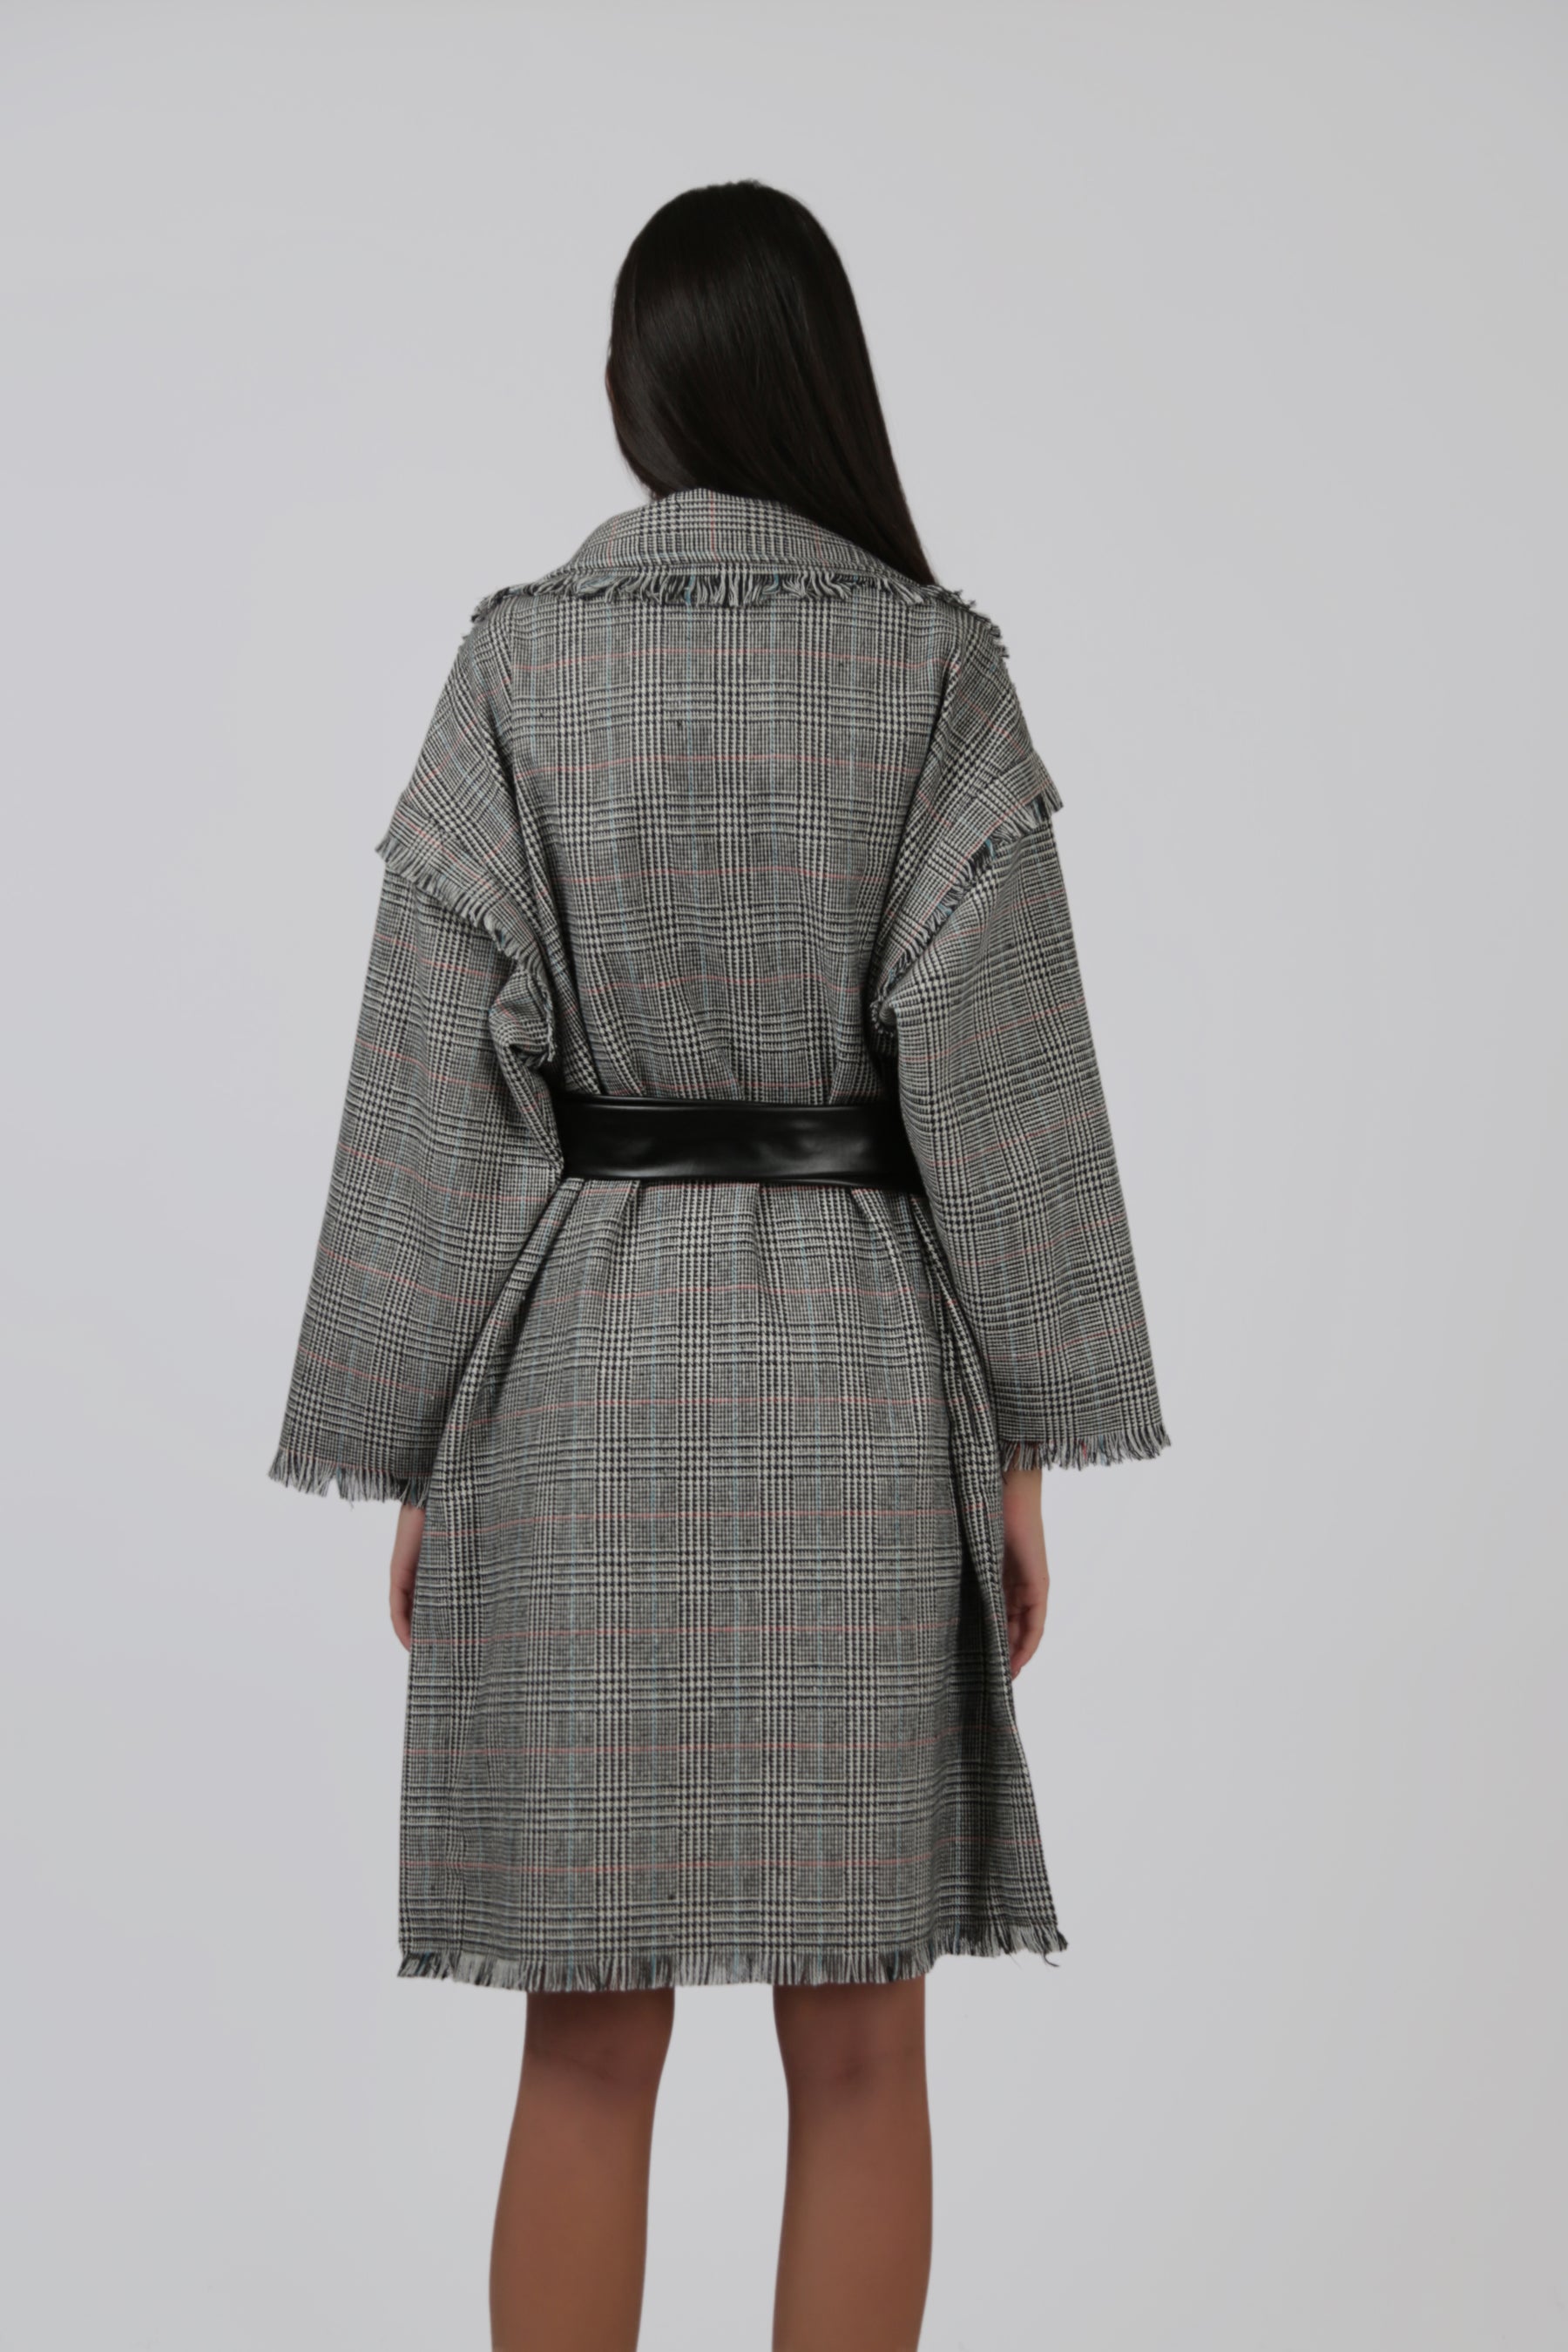 Checked Frill Coat with Black Faux Leather Belt